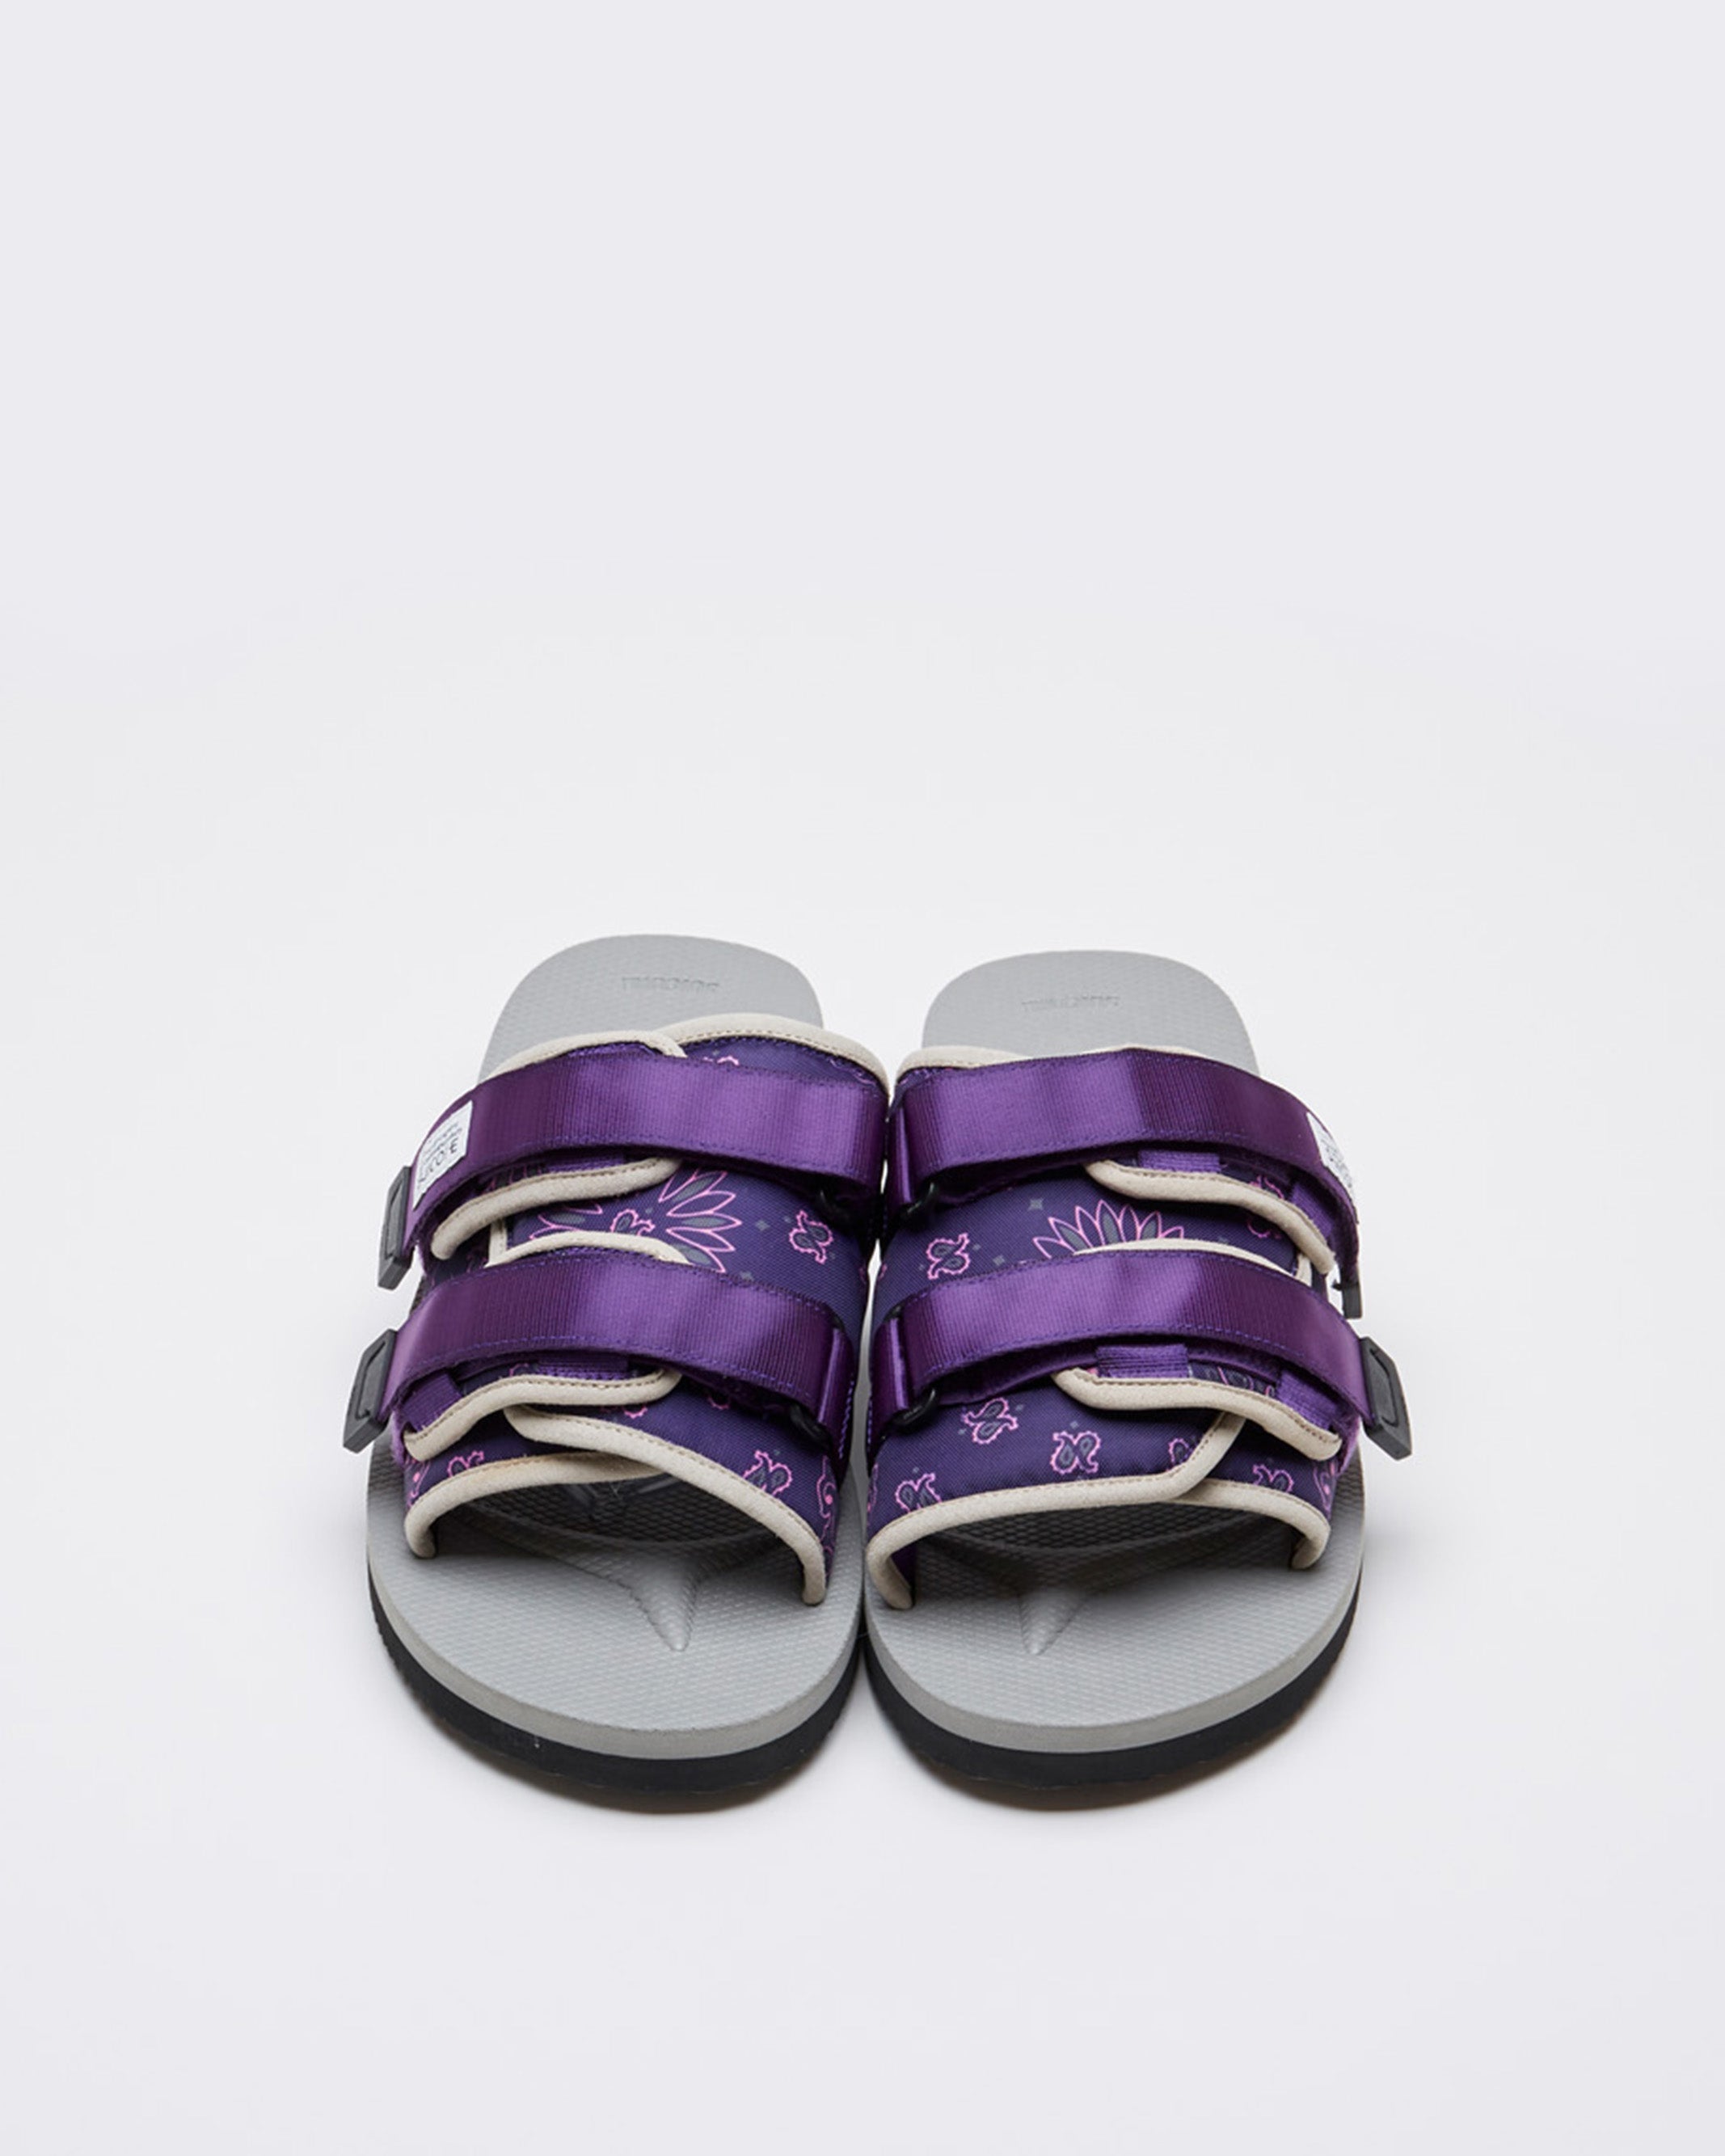 SUICOKE MOTO-Cab-PT03 in Purple OG-056CAB-PT03 | Shop from eightywingold an official brand partner for SUICOKE Canada and US.